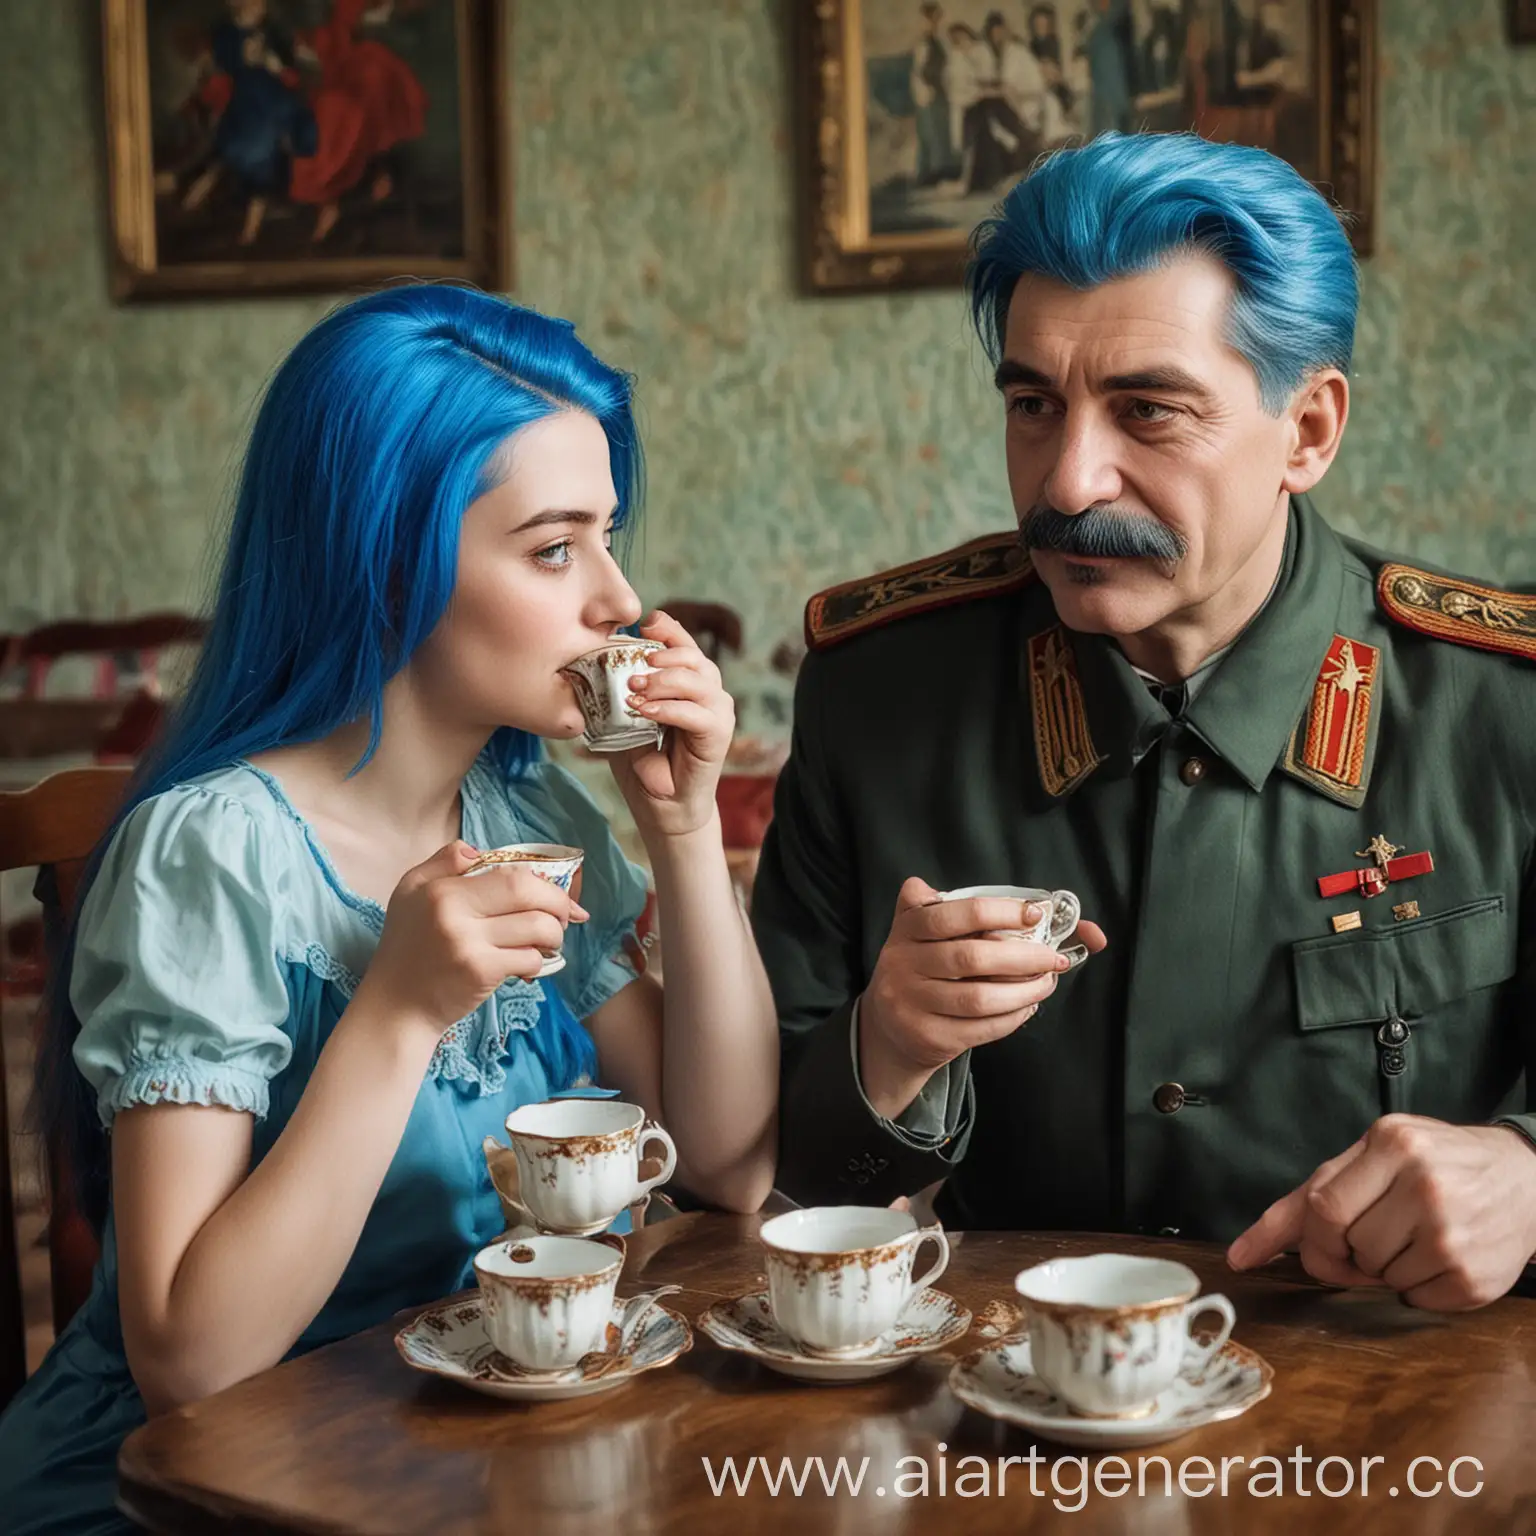 Stalin-and-Girl-with-Blue-Hair-Enjoying-Tea-Together